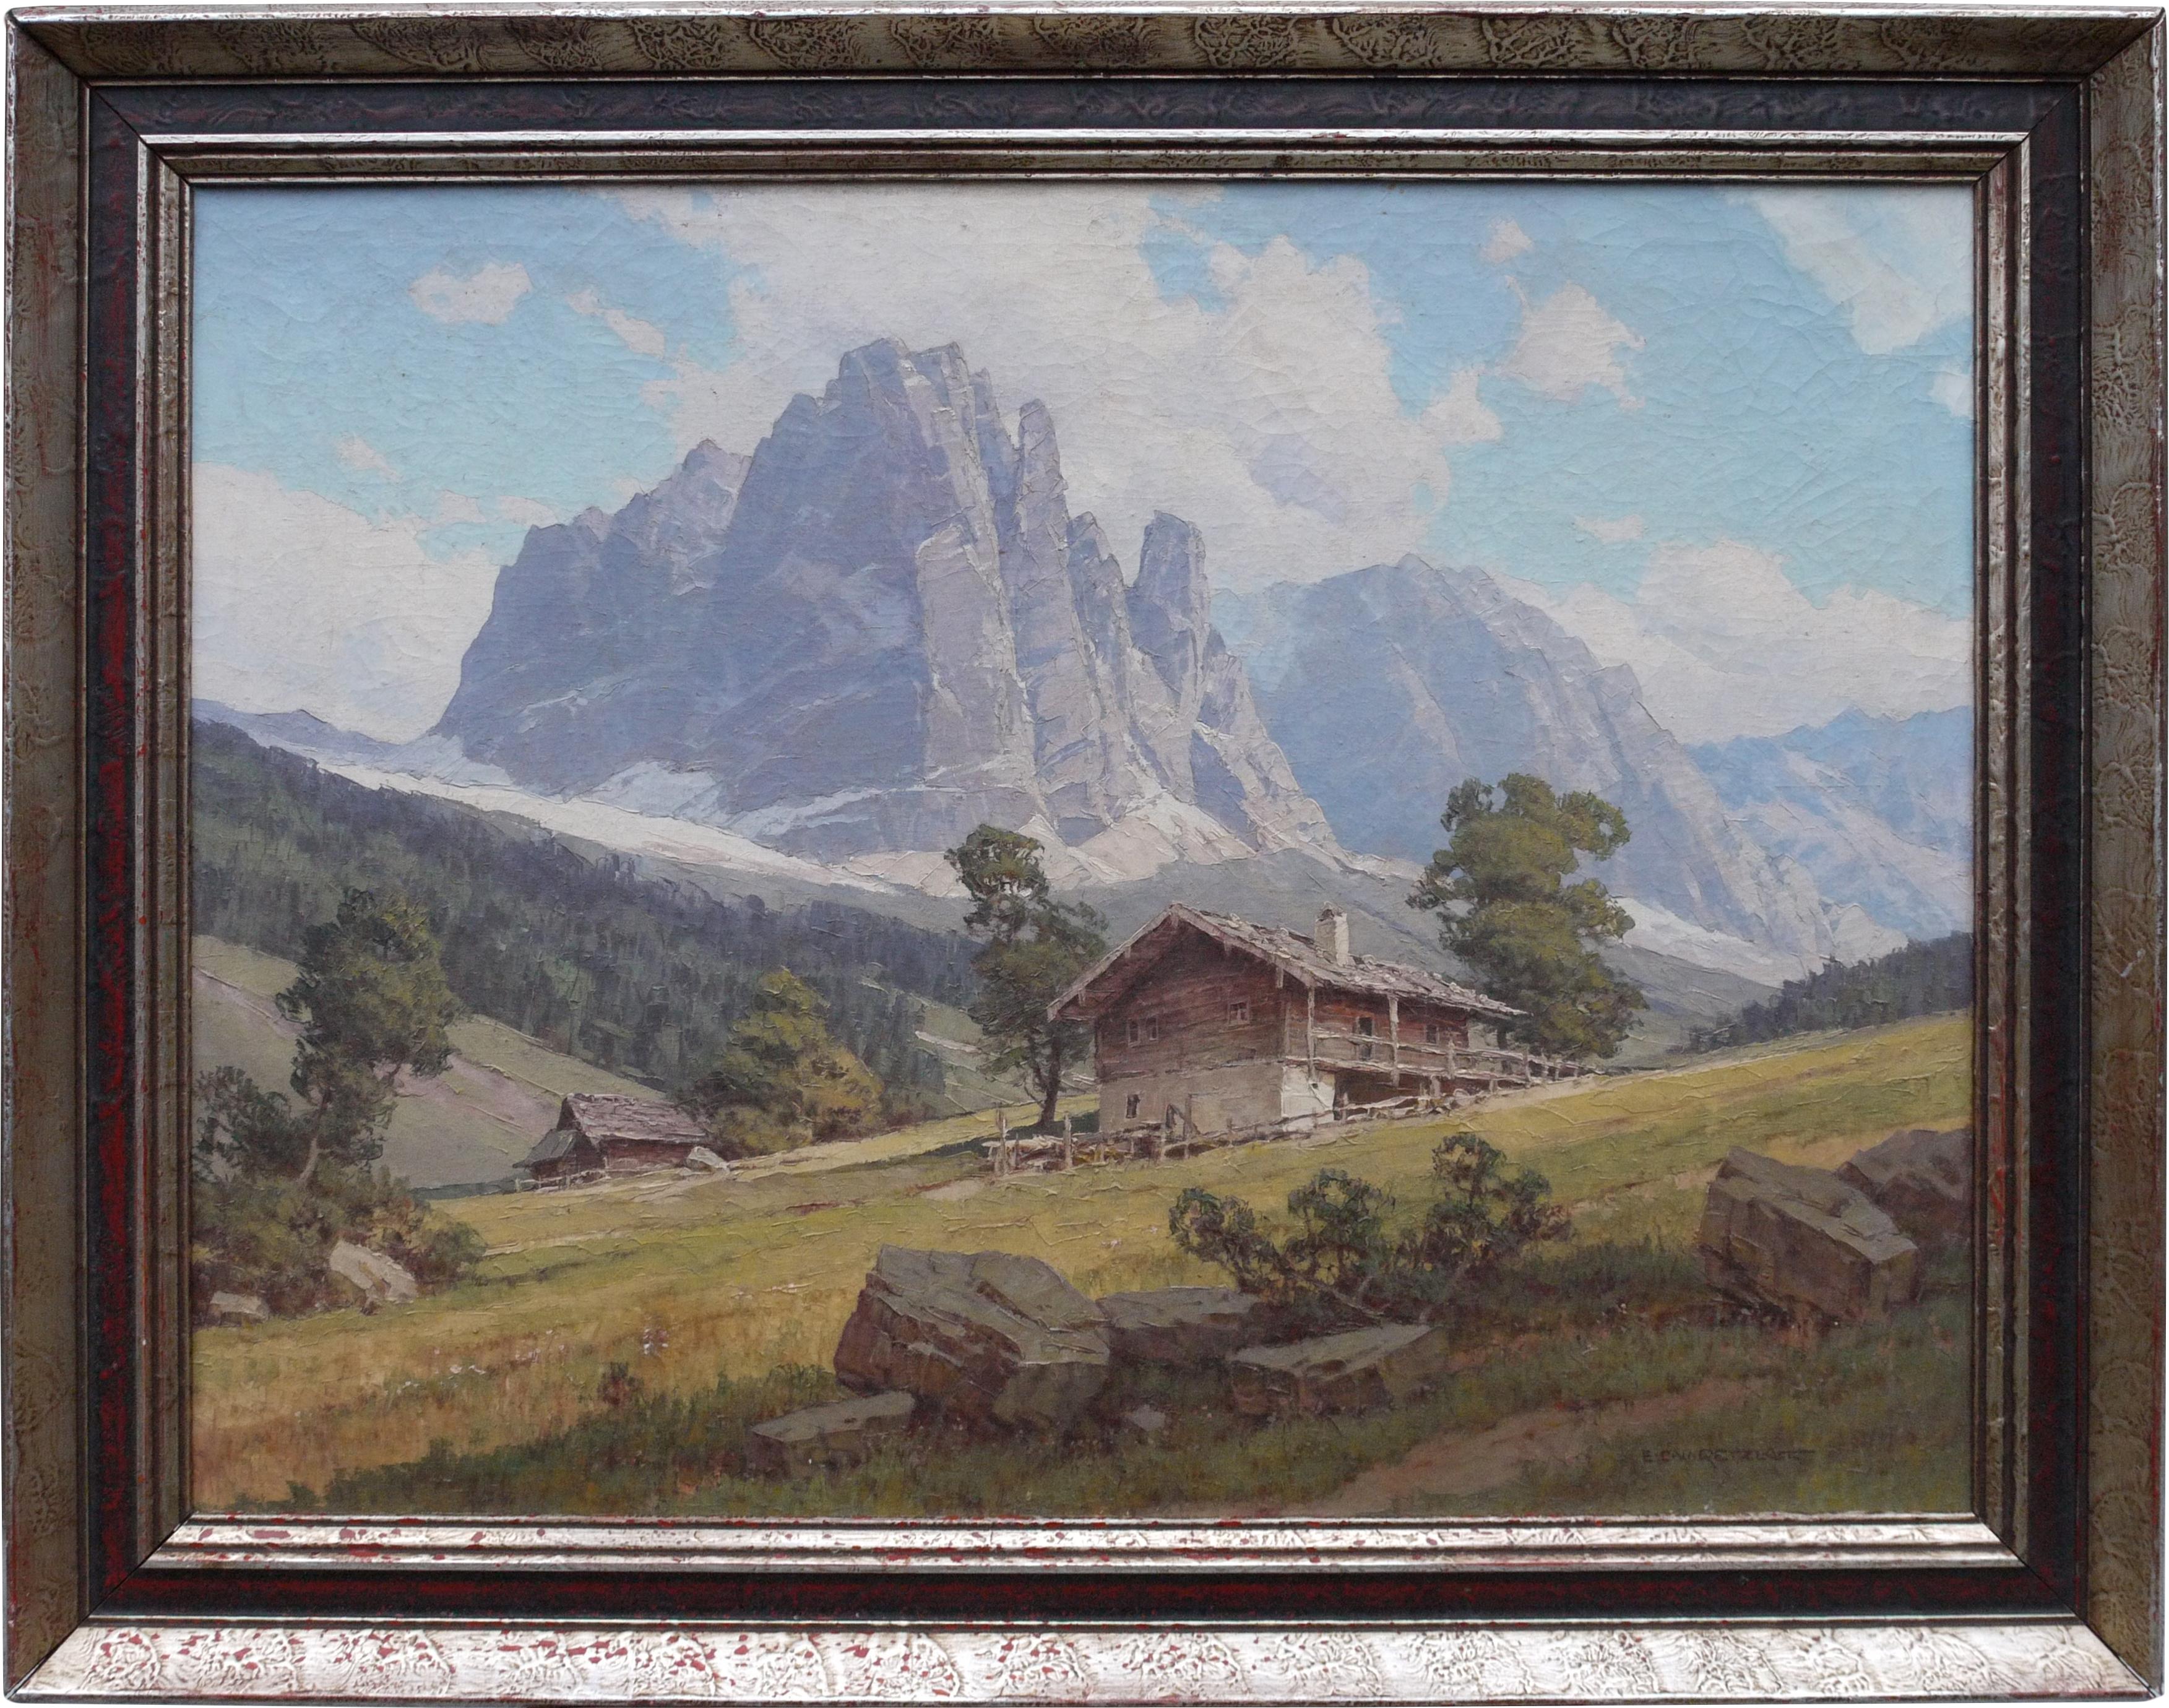 E.C.W. Retzlaff, the Sassolungo

Measures: cm 60 x cm 80 (without frame), oil on canvas, 1930s
23.6 in x 31.5 in (without frame)

Ernst Carl Walter Retzlaff (Berlin 1898 - 1976)

The Sassolungo, seen from Selva di Val Gardena, locality